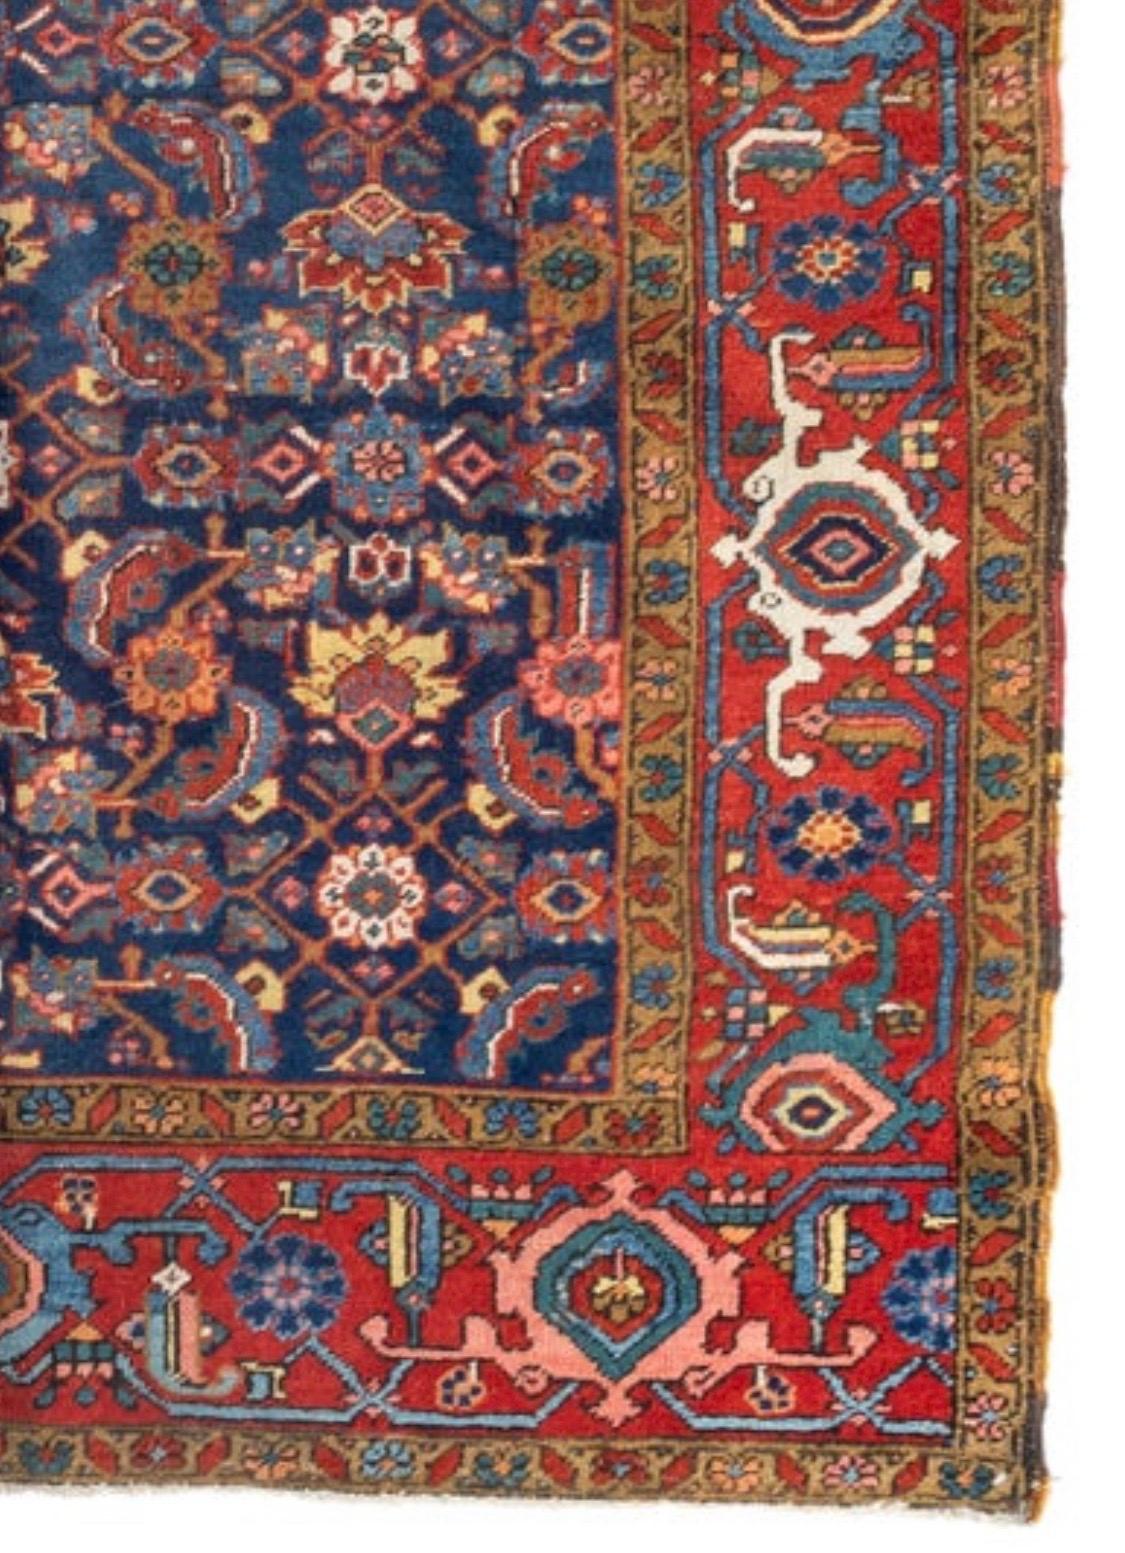 Hand-Knotted Antique Vintage Persian Red Gold Navy Blue Geometric Heriz Area Rug, circa 1920s For Sale